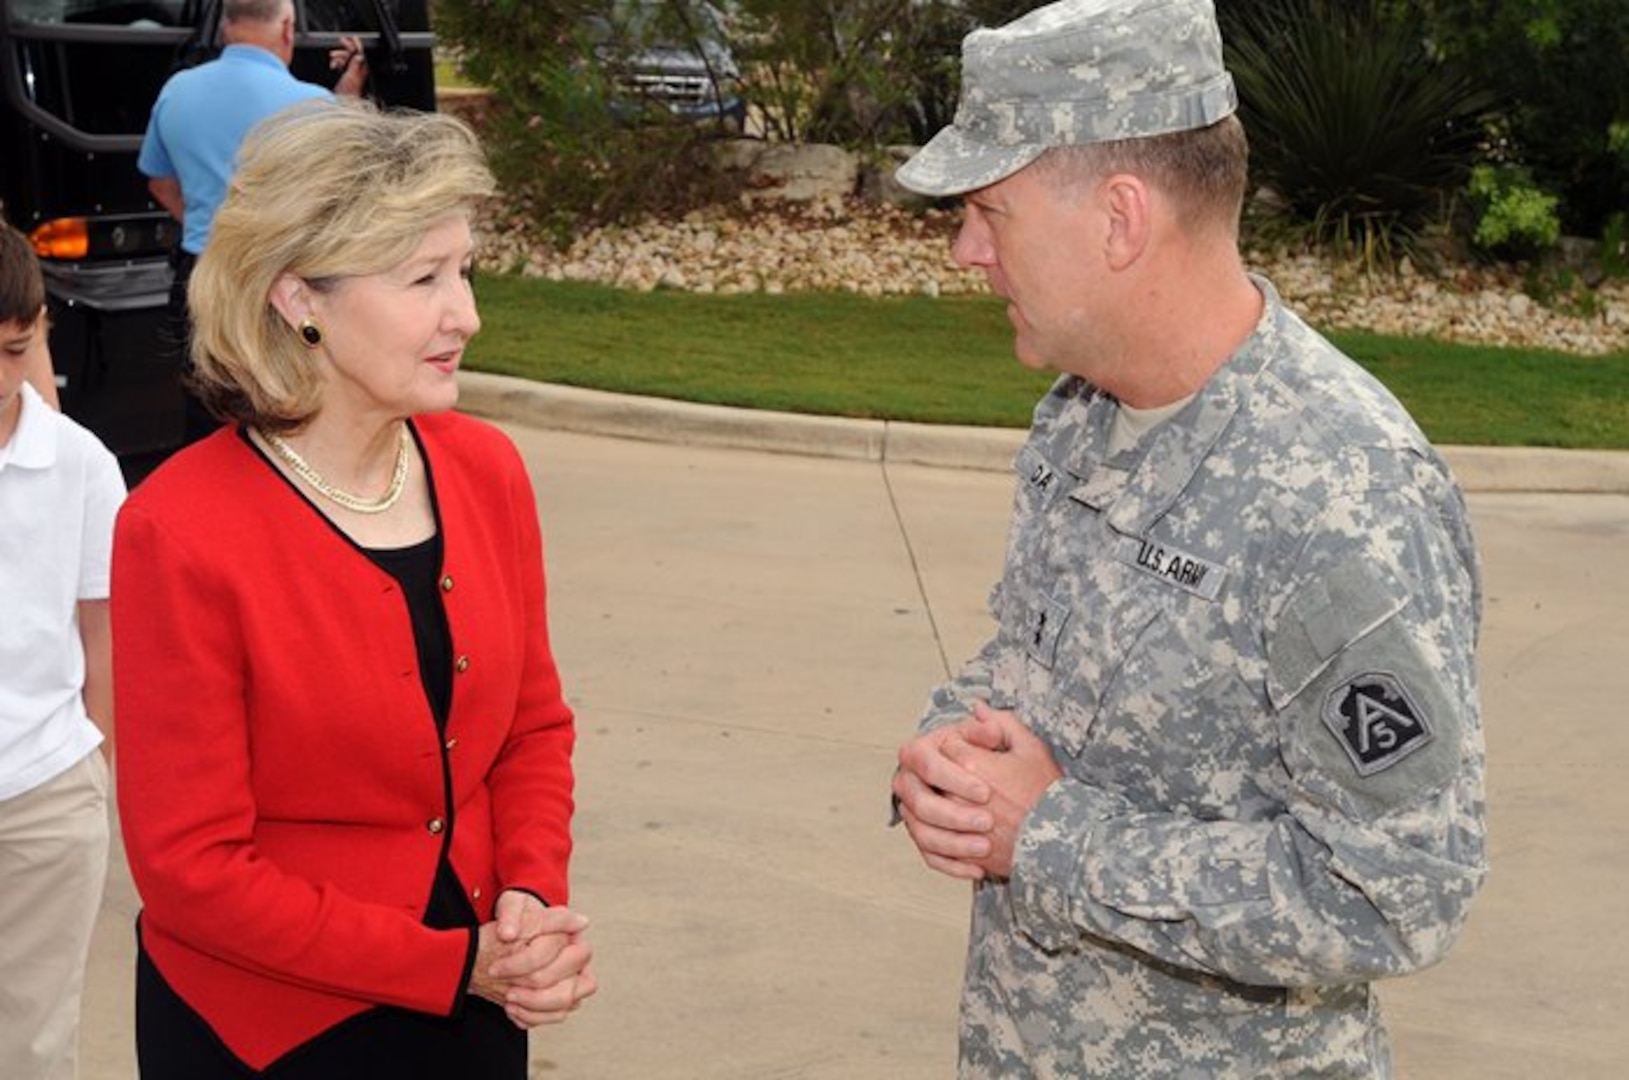 FORT SAM HOUSTON, Texas — Maj. Gen. Walter Davis, deputy commanding general, U.S. Army North, welcomes Senator Kay Bailey Hutchison of Texas to the Warrior and Family Support Center July 2 for a private ceremony to present the Purple Heart Medal to a Soldier. After the ceremony, Hutchison toured the WFSC with Davis and Judith Markelz, the WFSC’s program director, and took advantage of an opportunity to meet the Wounded Warriors and their Families. “It is always so moving to visit with soldiers who have been wounded while fighting for their country – and with their families, said Hutchison. “The work done at the Warrior and Family Support Center is tremendously important to our men and women in uniform.” (U.S. Army photo by Staff Sgt. Keith Anderson, Army North PAO)